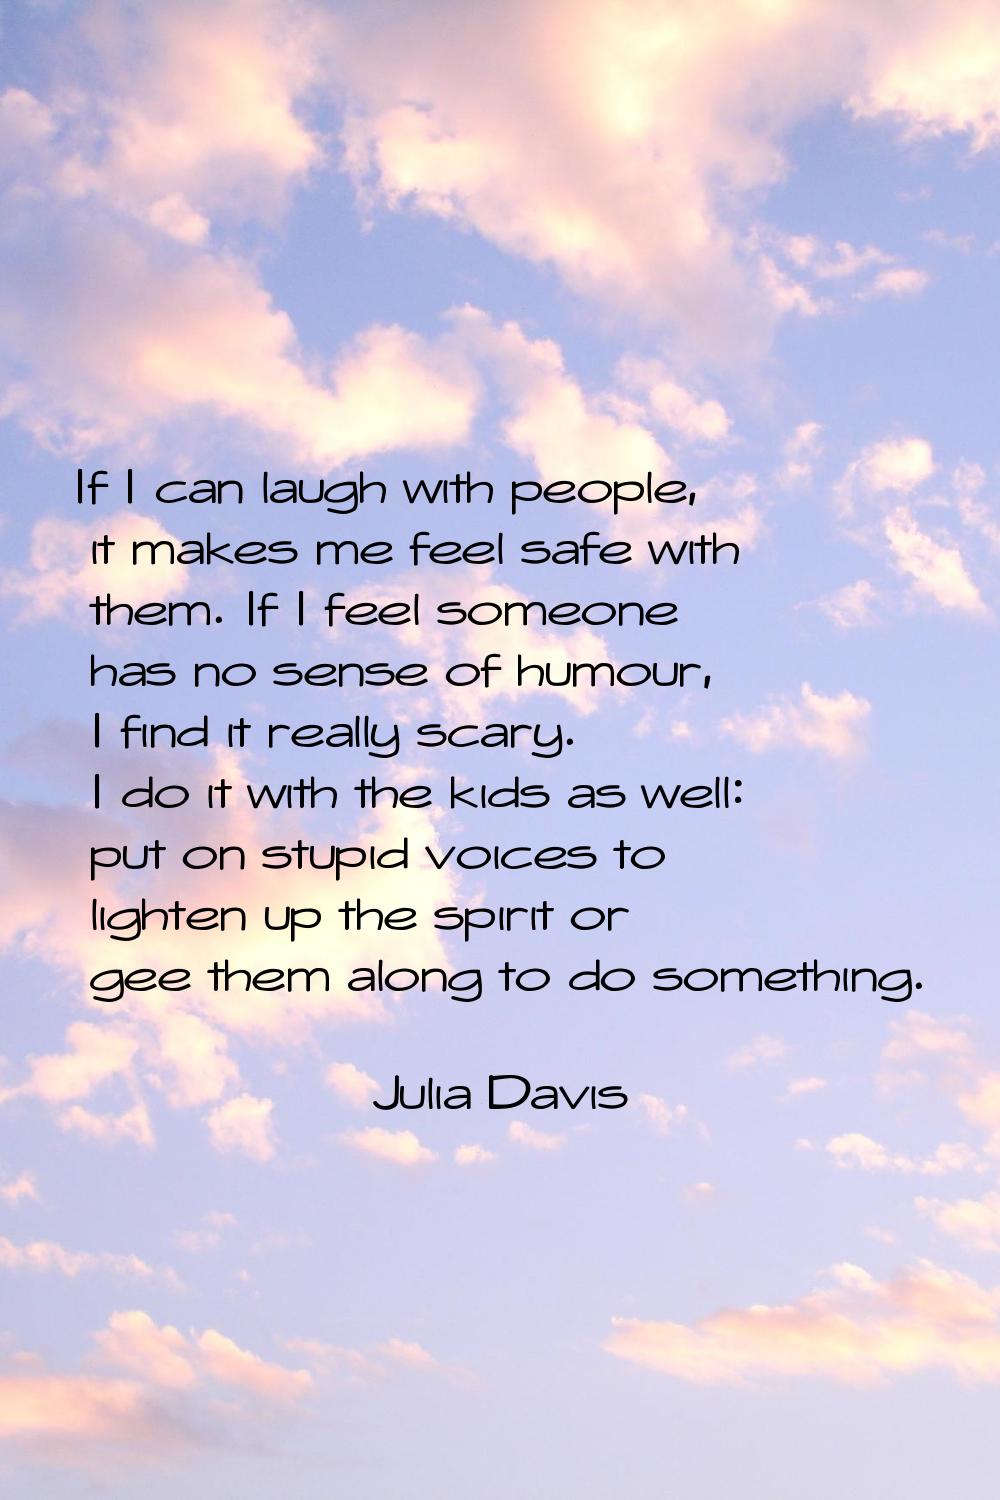 If I can laugh with people, it makes me feel safe with them. If I feel someone has no sense of humo